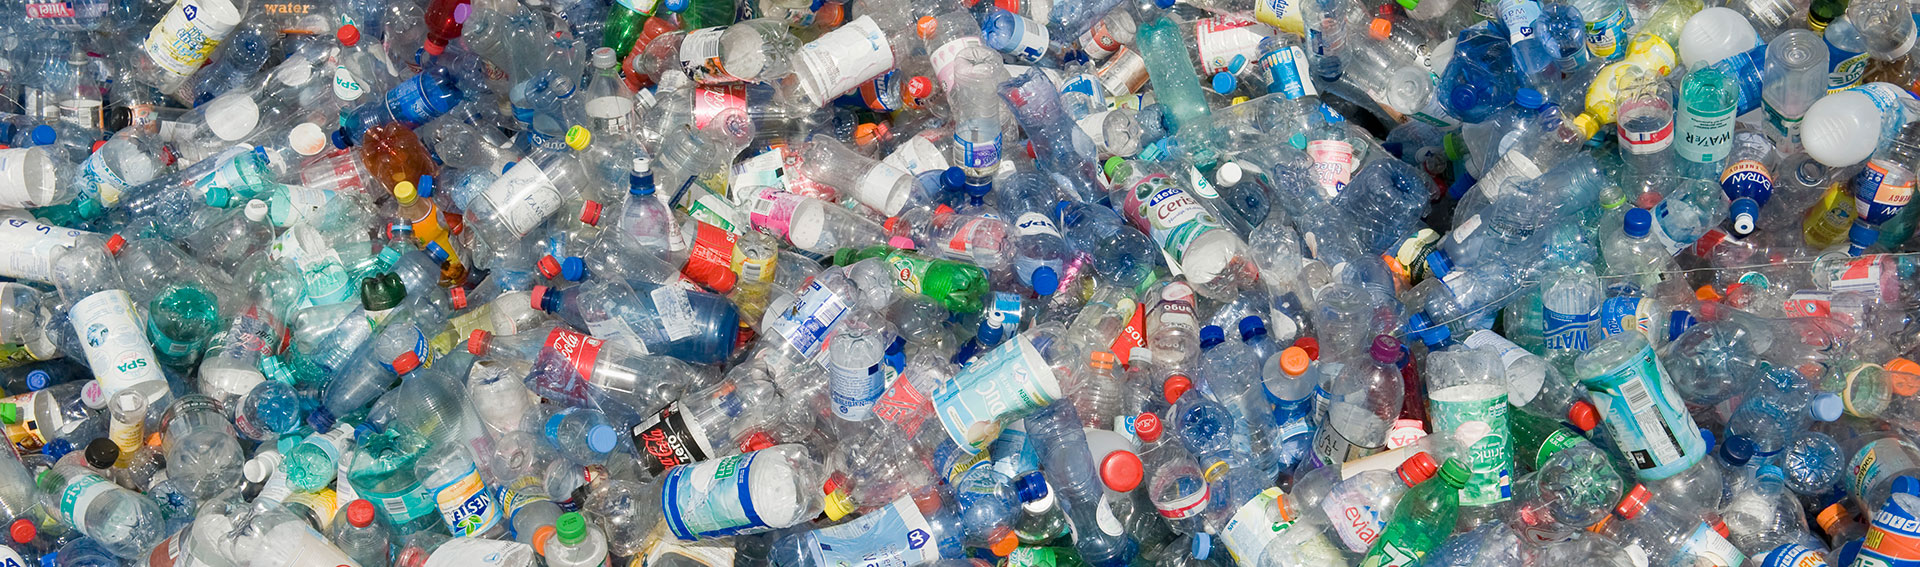 post image The world is enraged. What can investors do about plastic pollution?